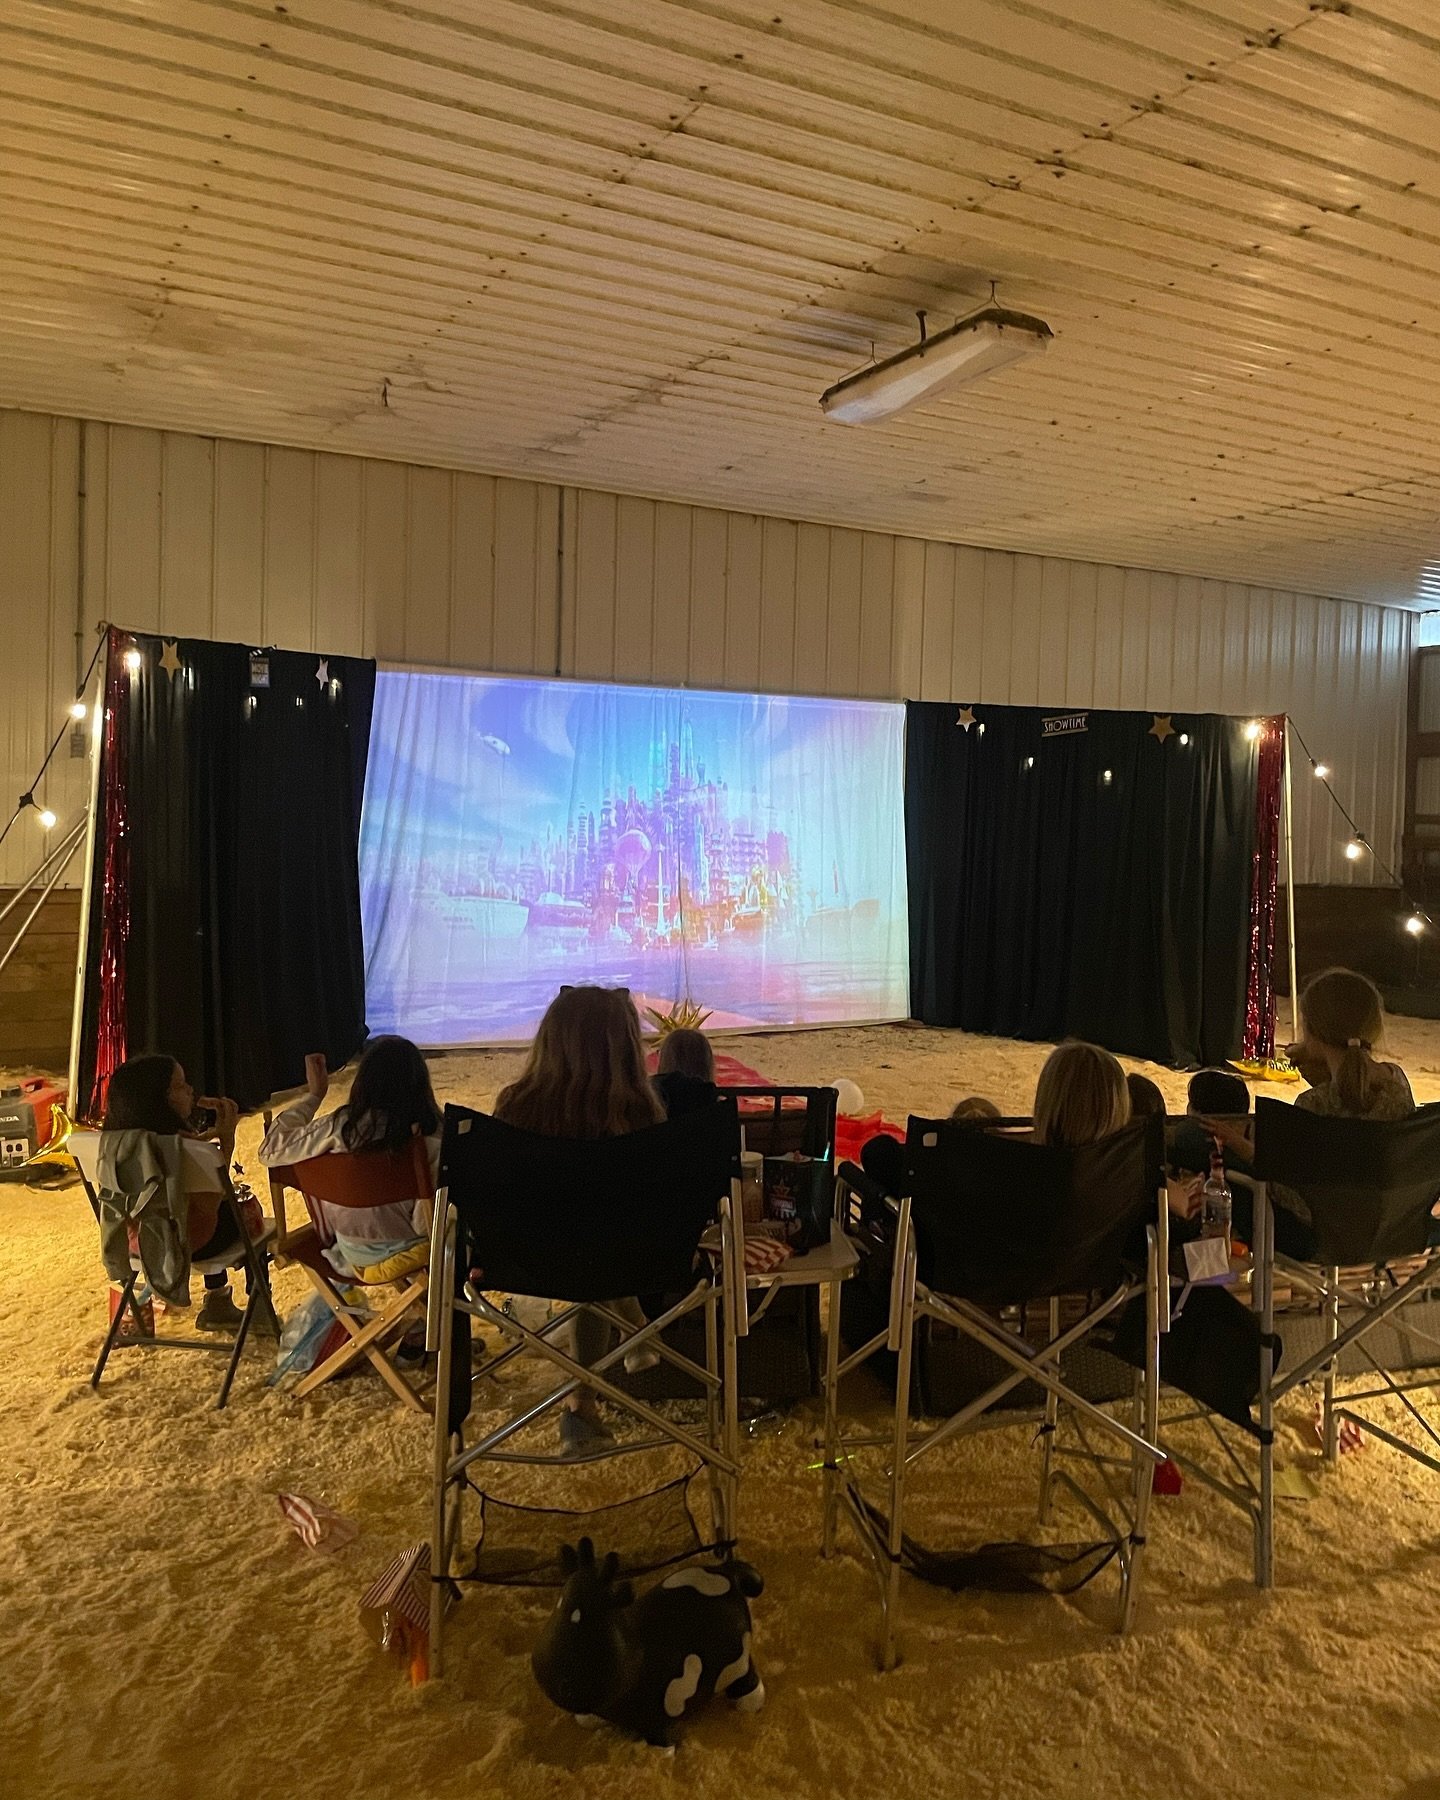 From calving barn to sale facility and now movie barn for a 9th birthday party! Hosting a great group of girlies tonight! 🎉🎂🥳🎊 Thanks to Mark for putting up with my crazy ideas!